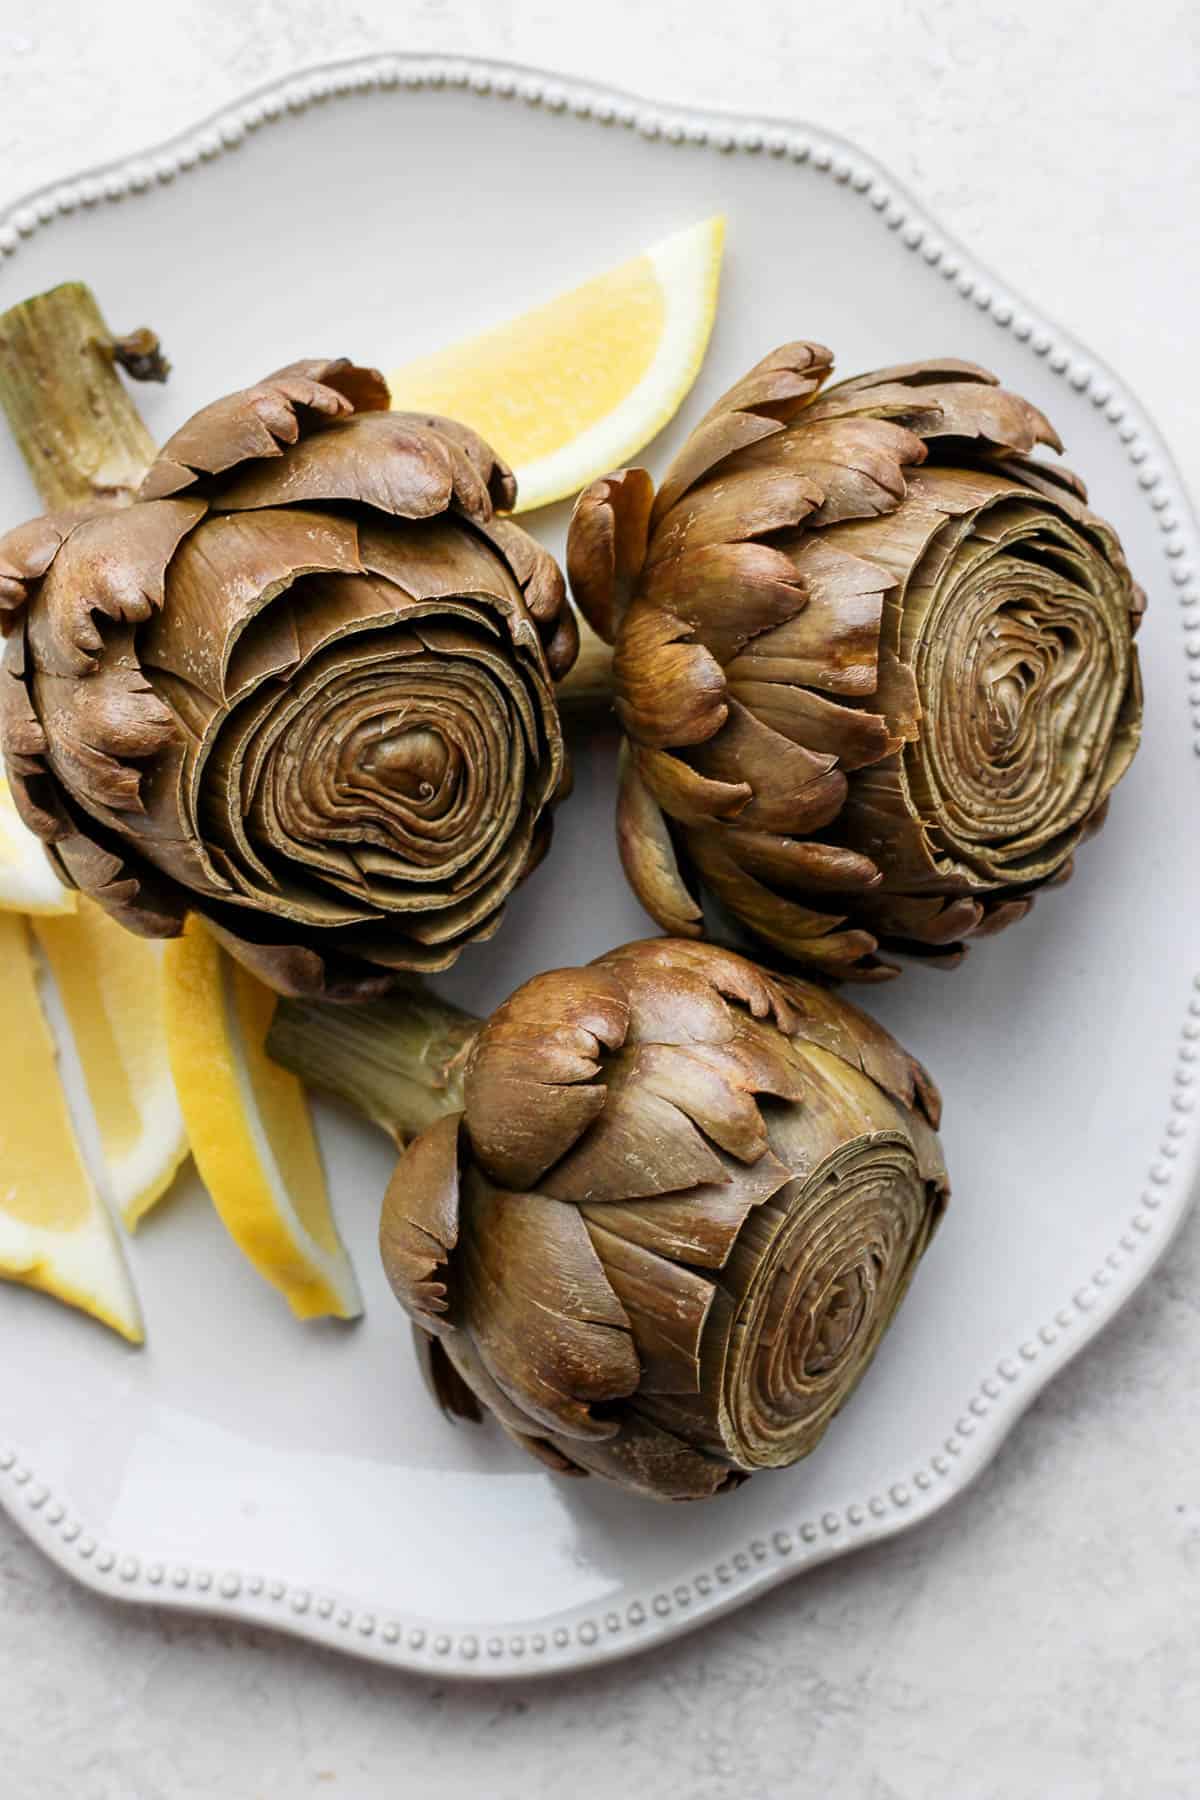 Final plated steamed artichokes